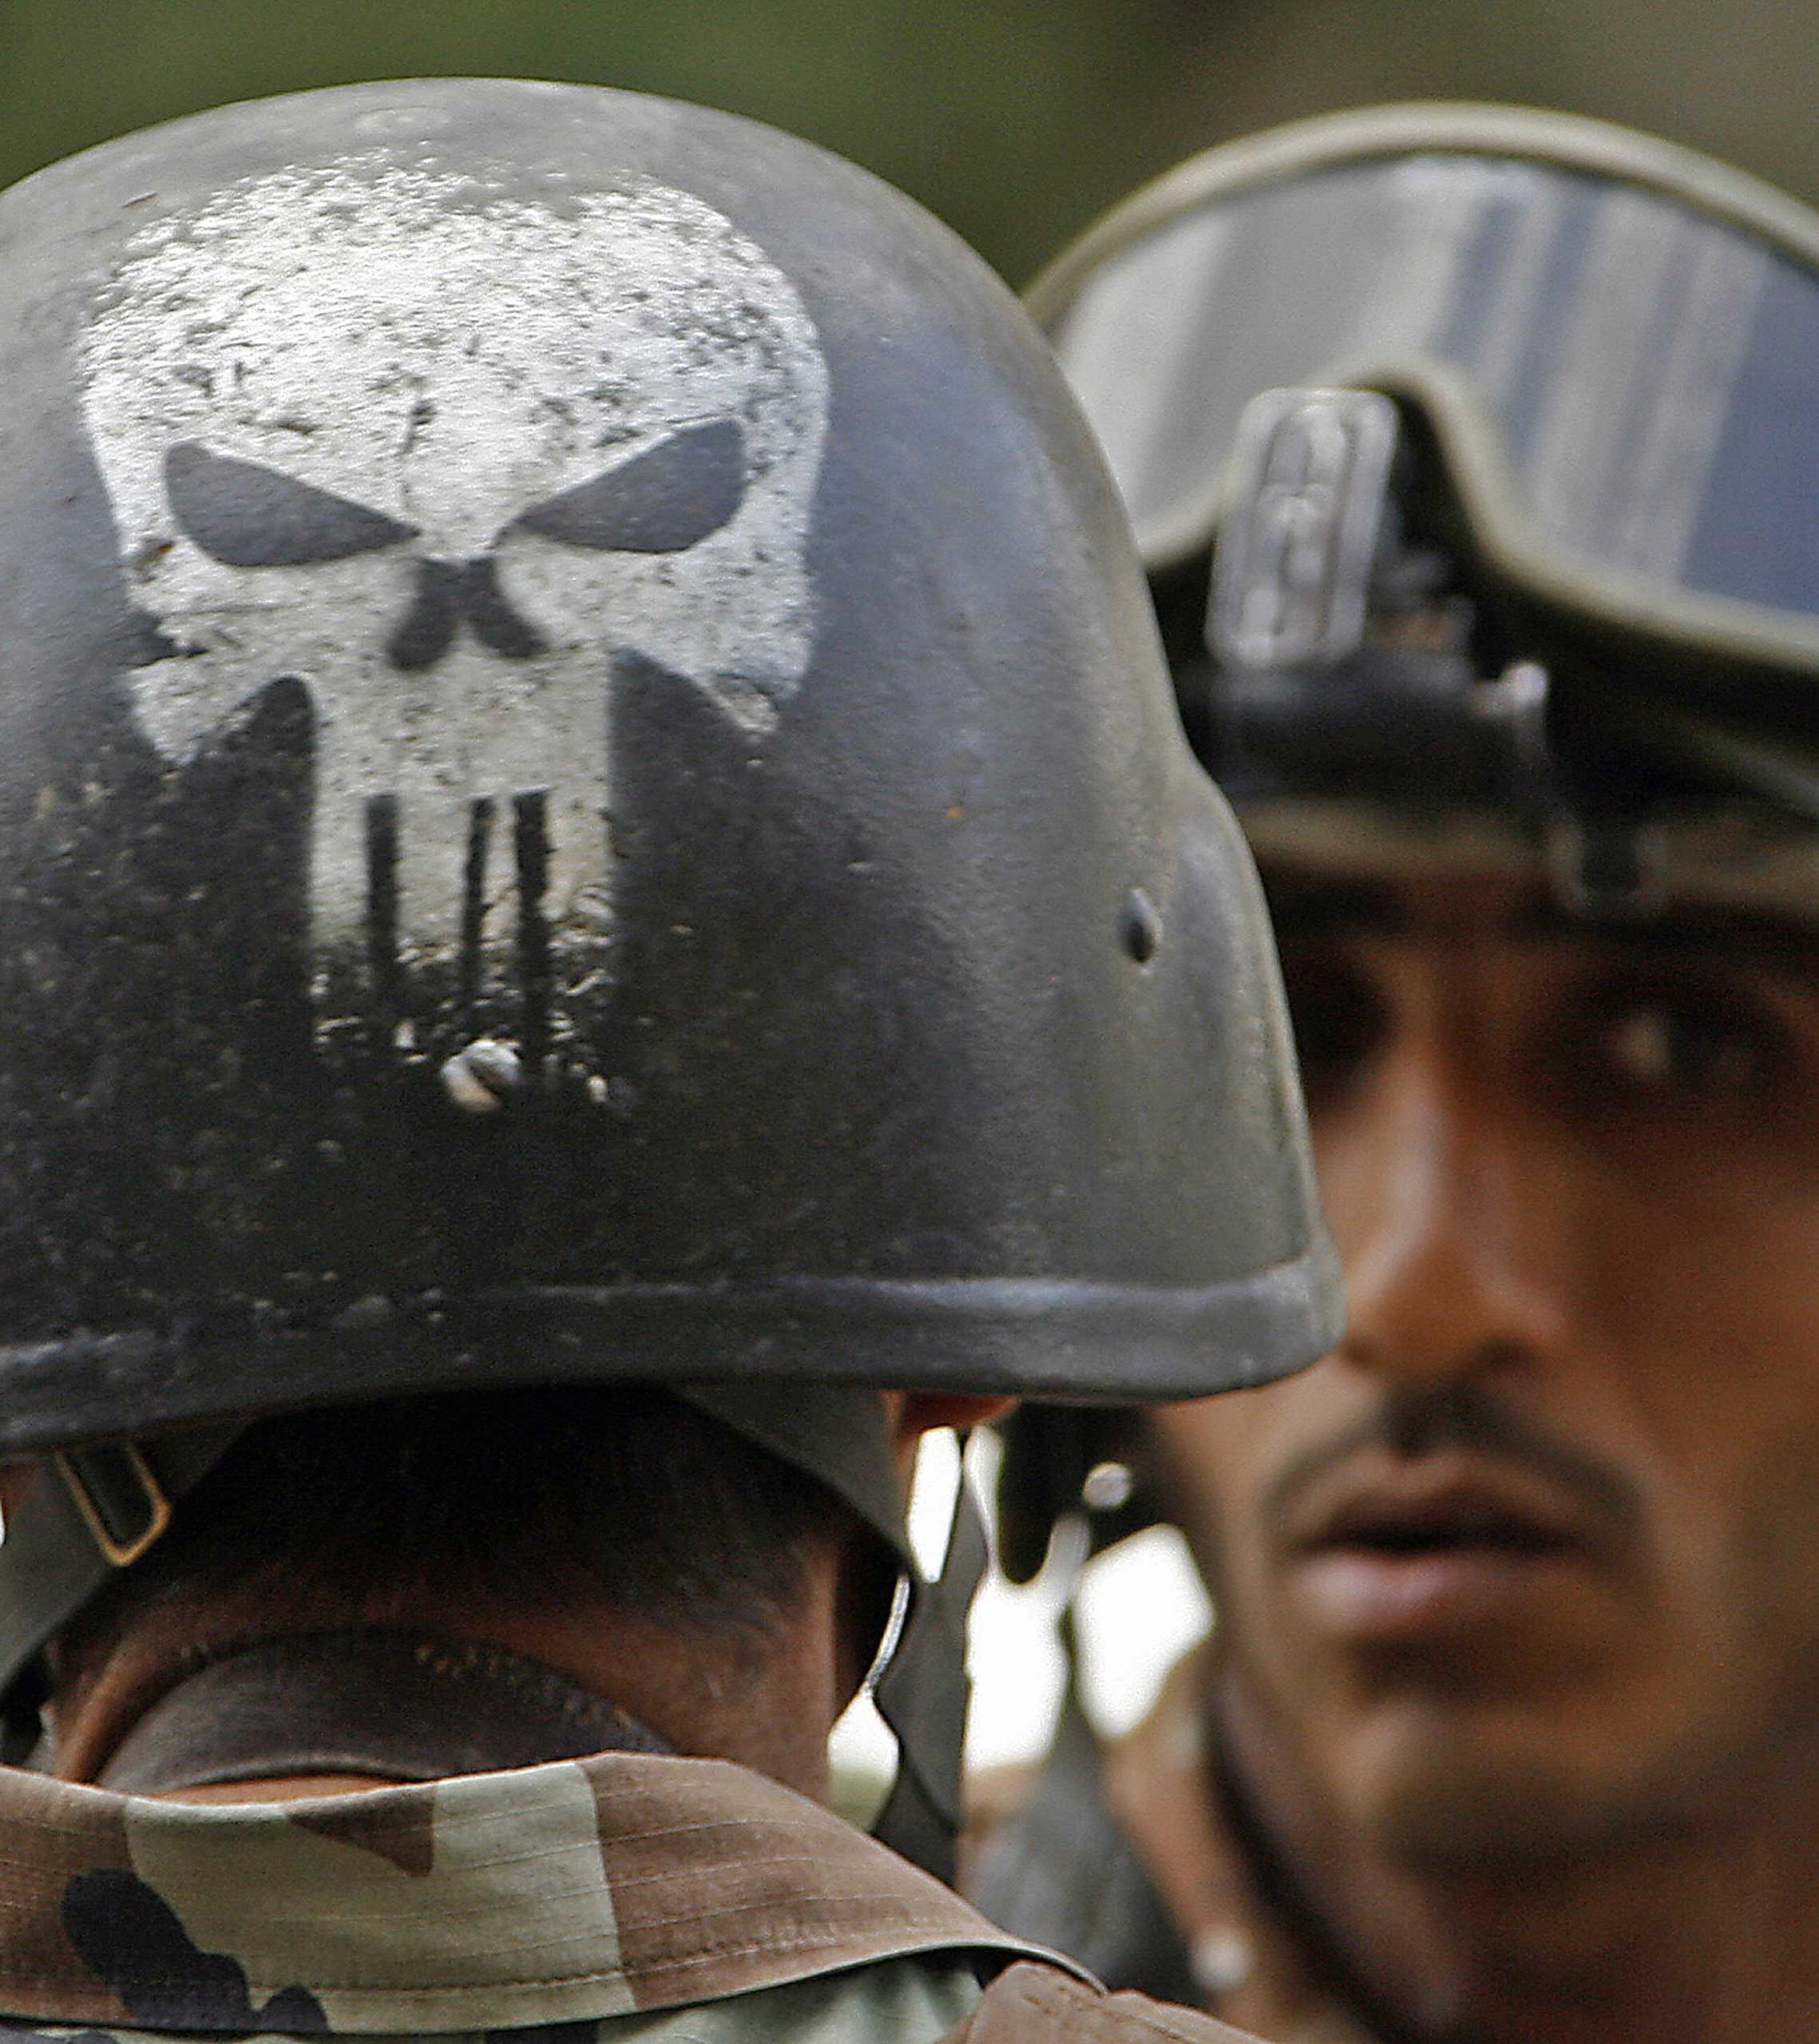 The Punisher skull logo seen painted on the helmet of an Iraqi army soldier patrolling in Baghdad in 2007.